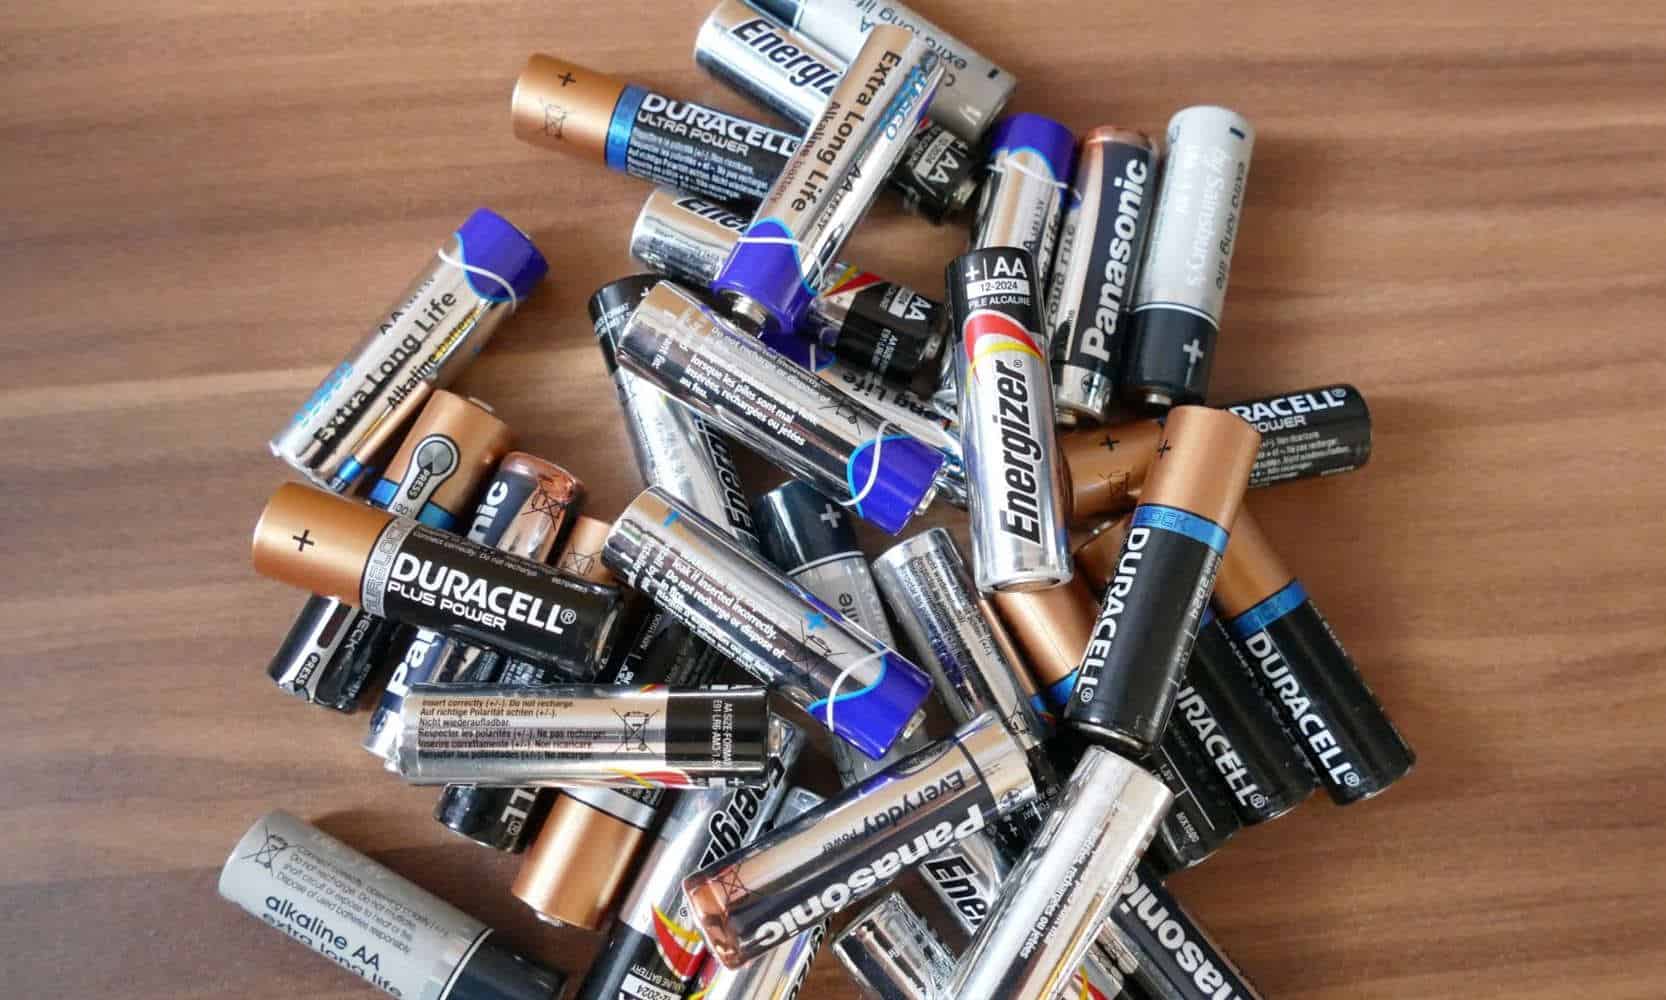 do energizer rechargeable batteries work in solar lights